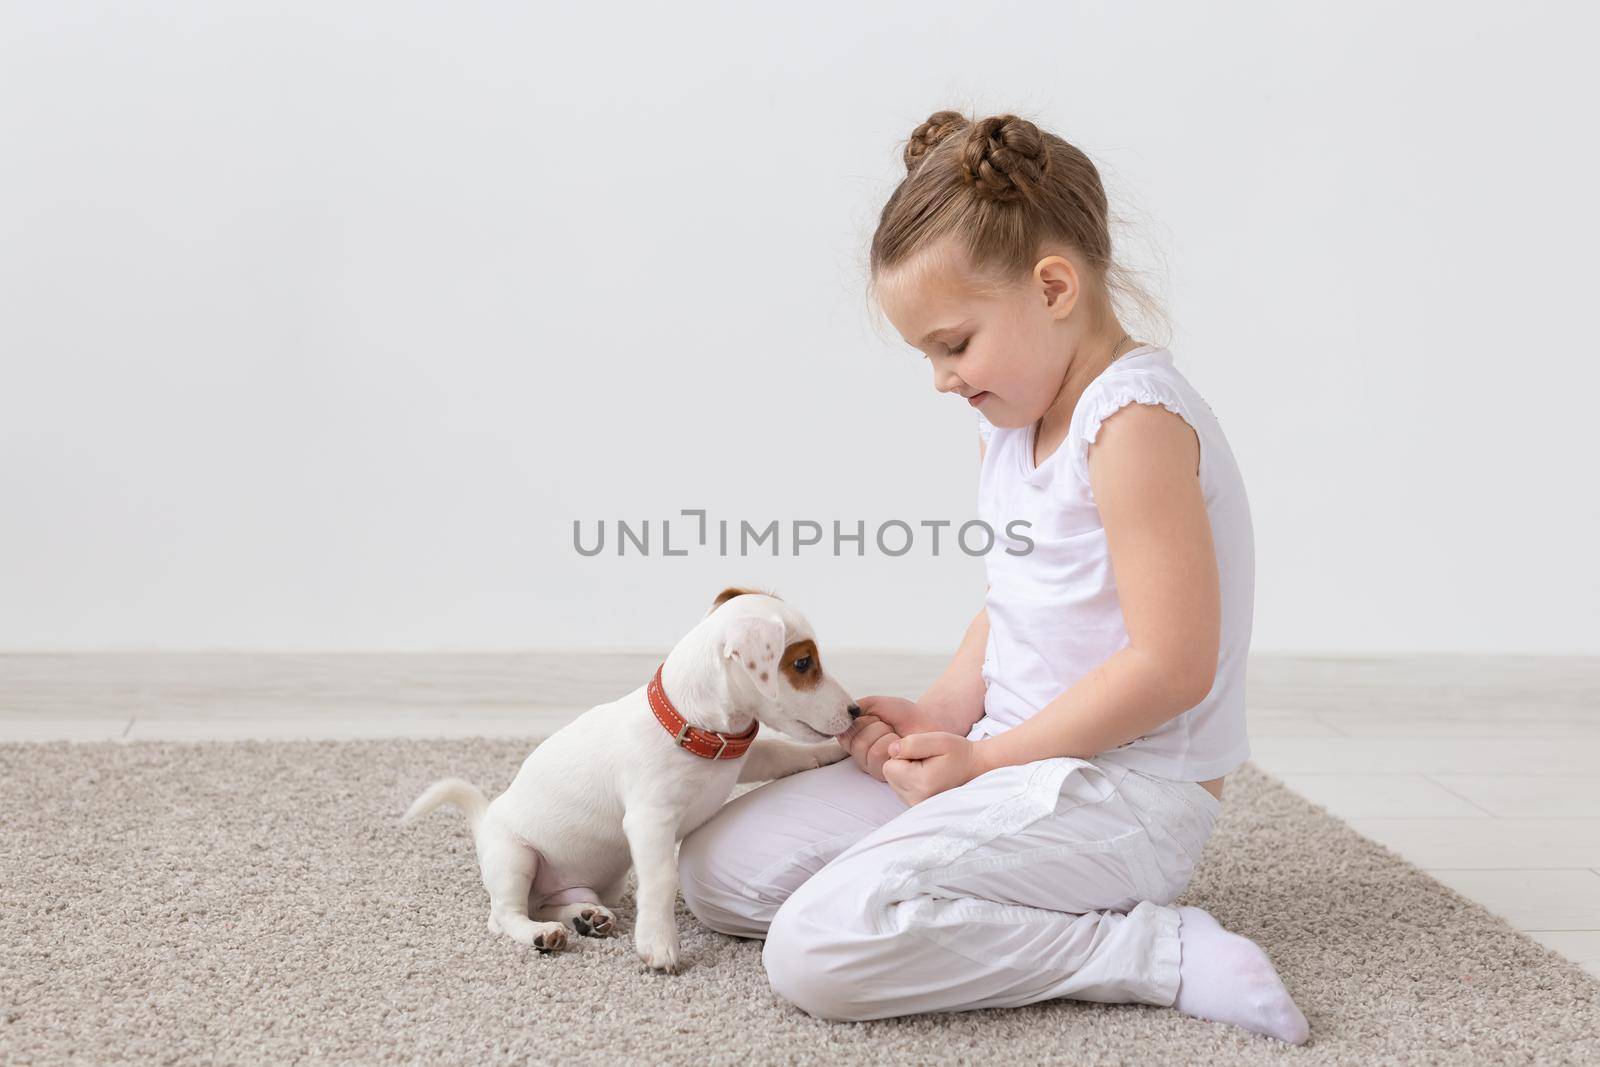 Animals, children and pets concept - little child girl sitting on the floor with cute puppy and playing.